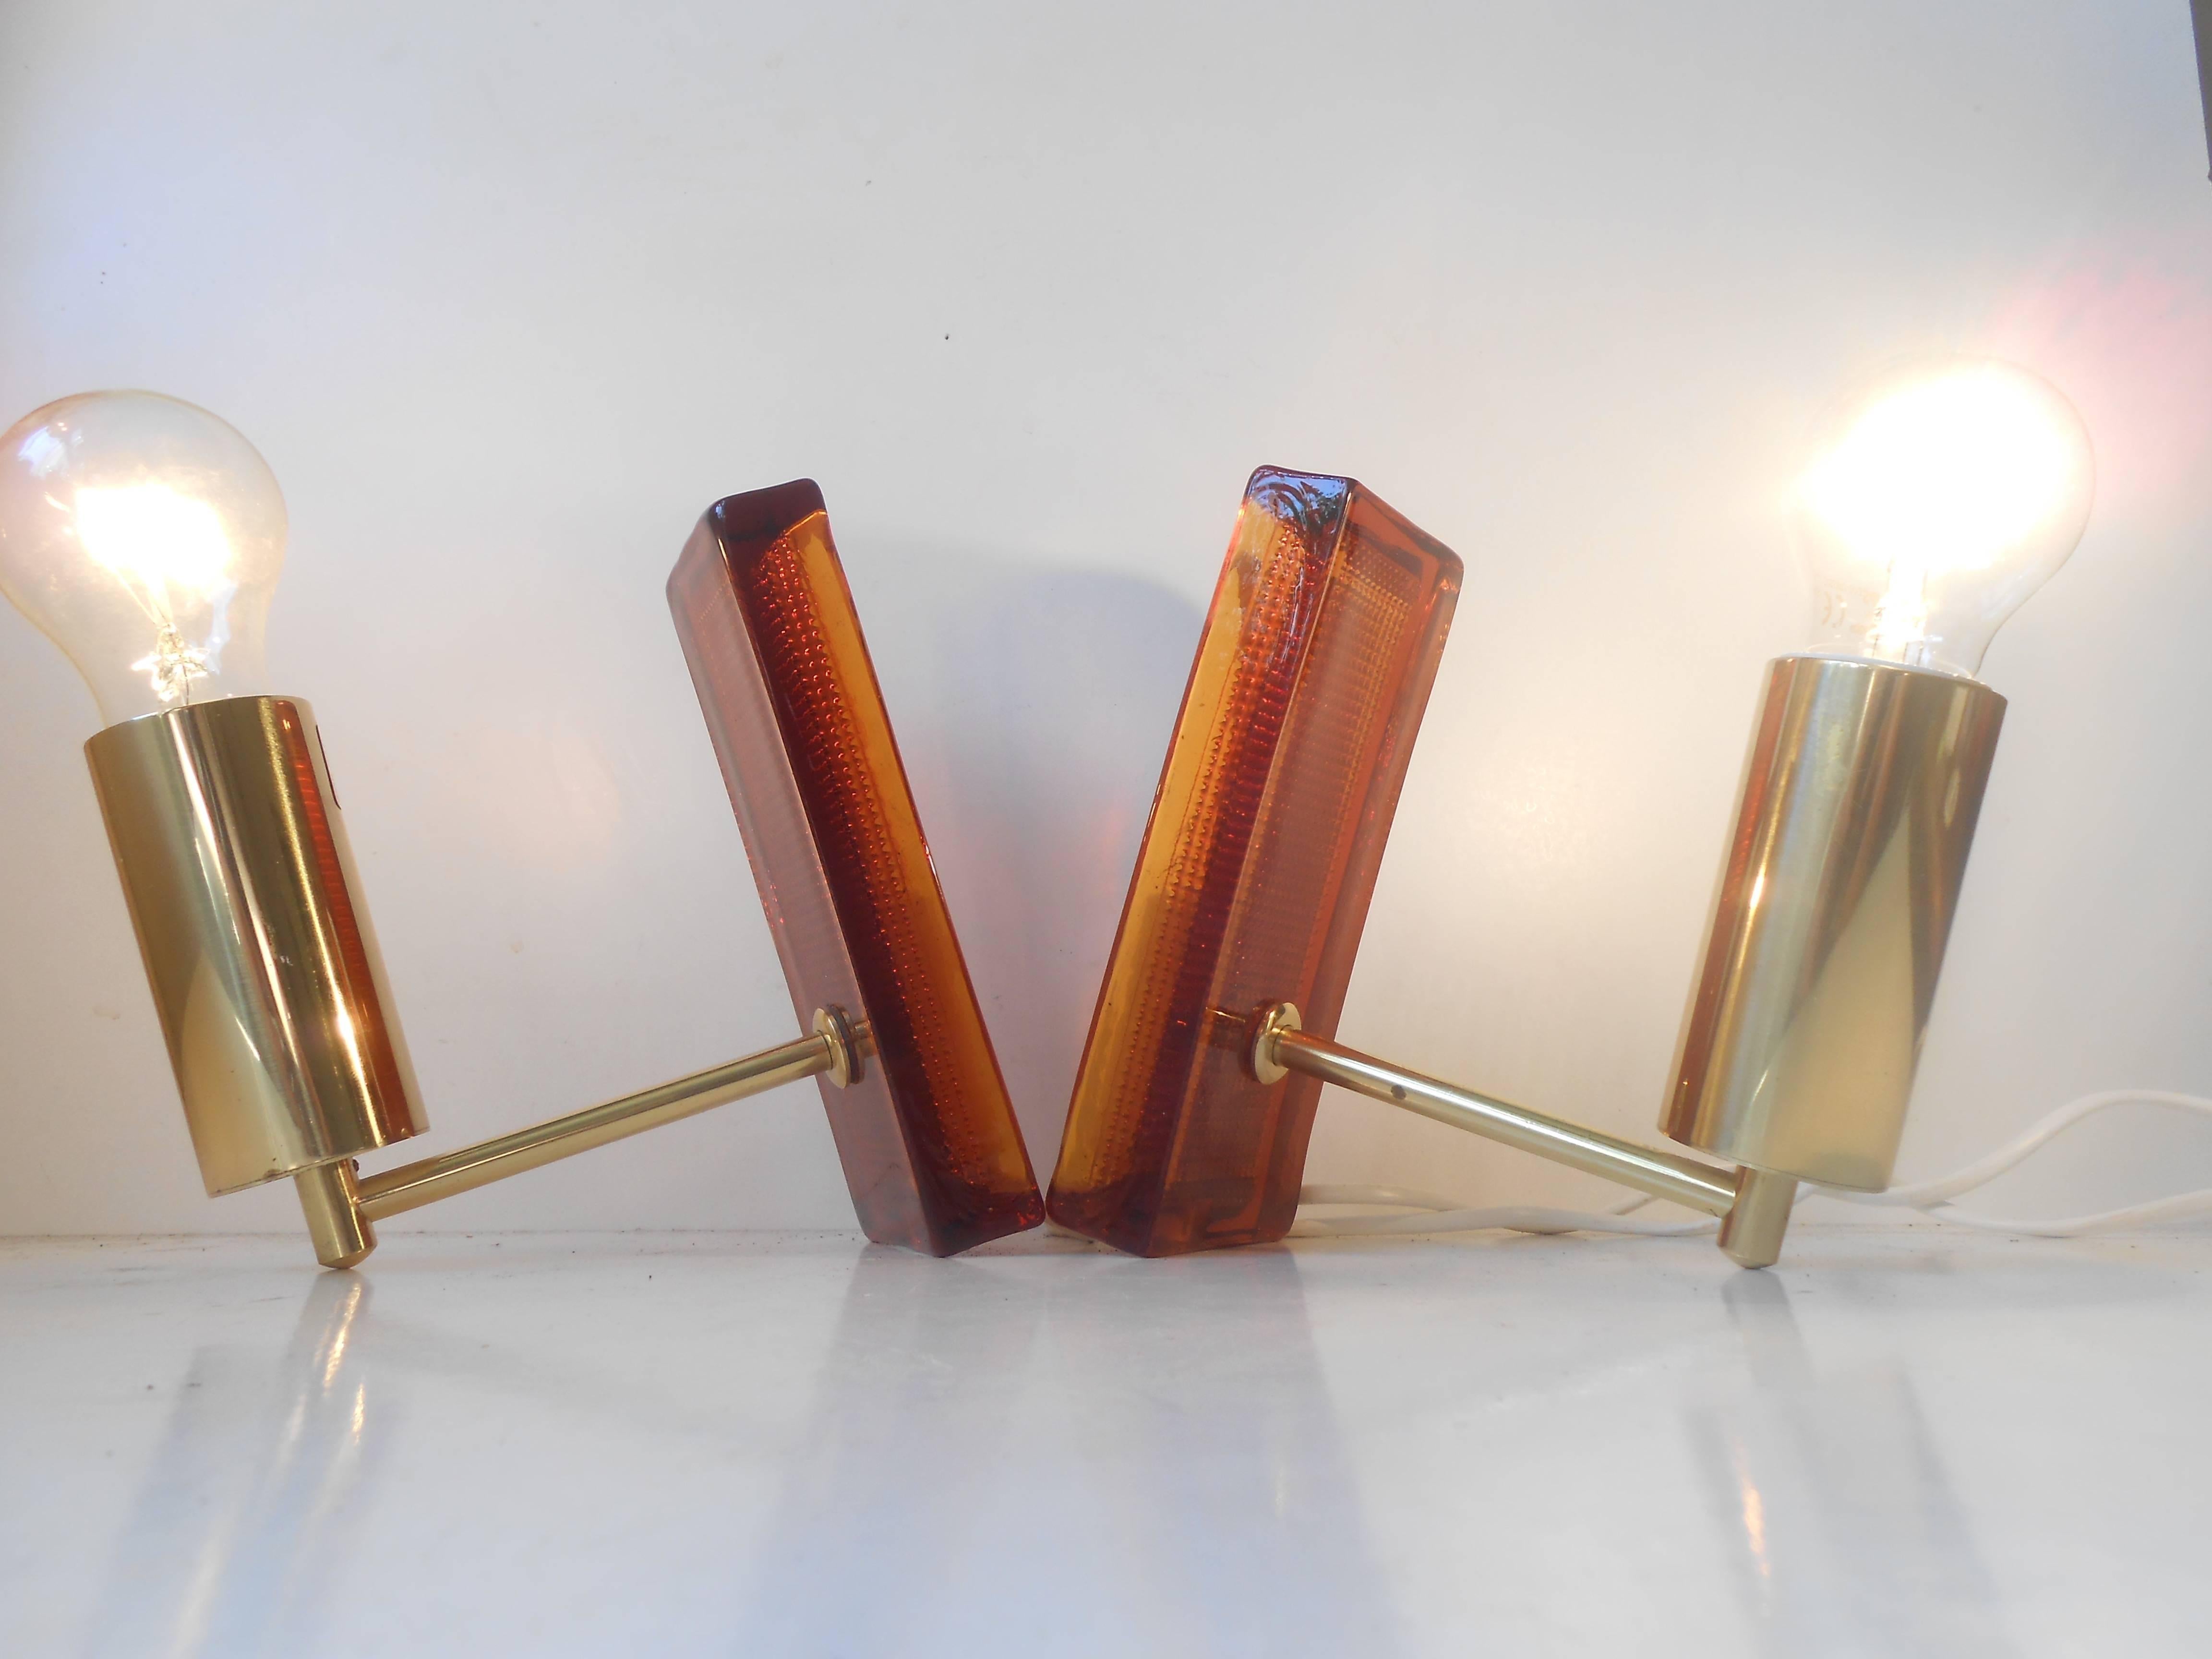 A rare pair of wall lights in gilded brass and amber glass. Measurements: Dept: 7 inches (18 cm), height: 8 inches (20 cm). Beautiful condition with no remarks. The price is for the pair.